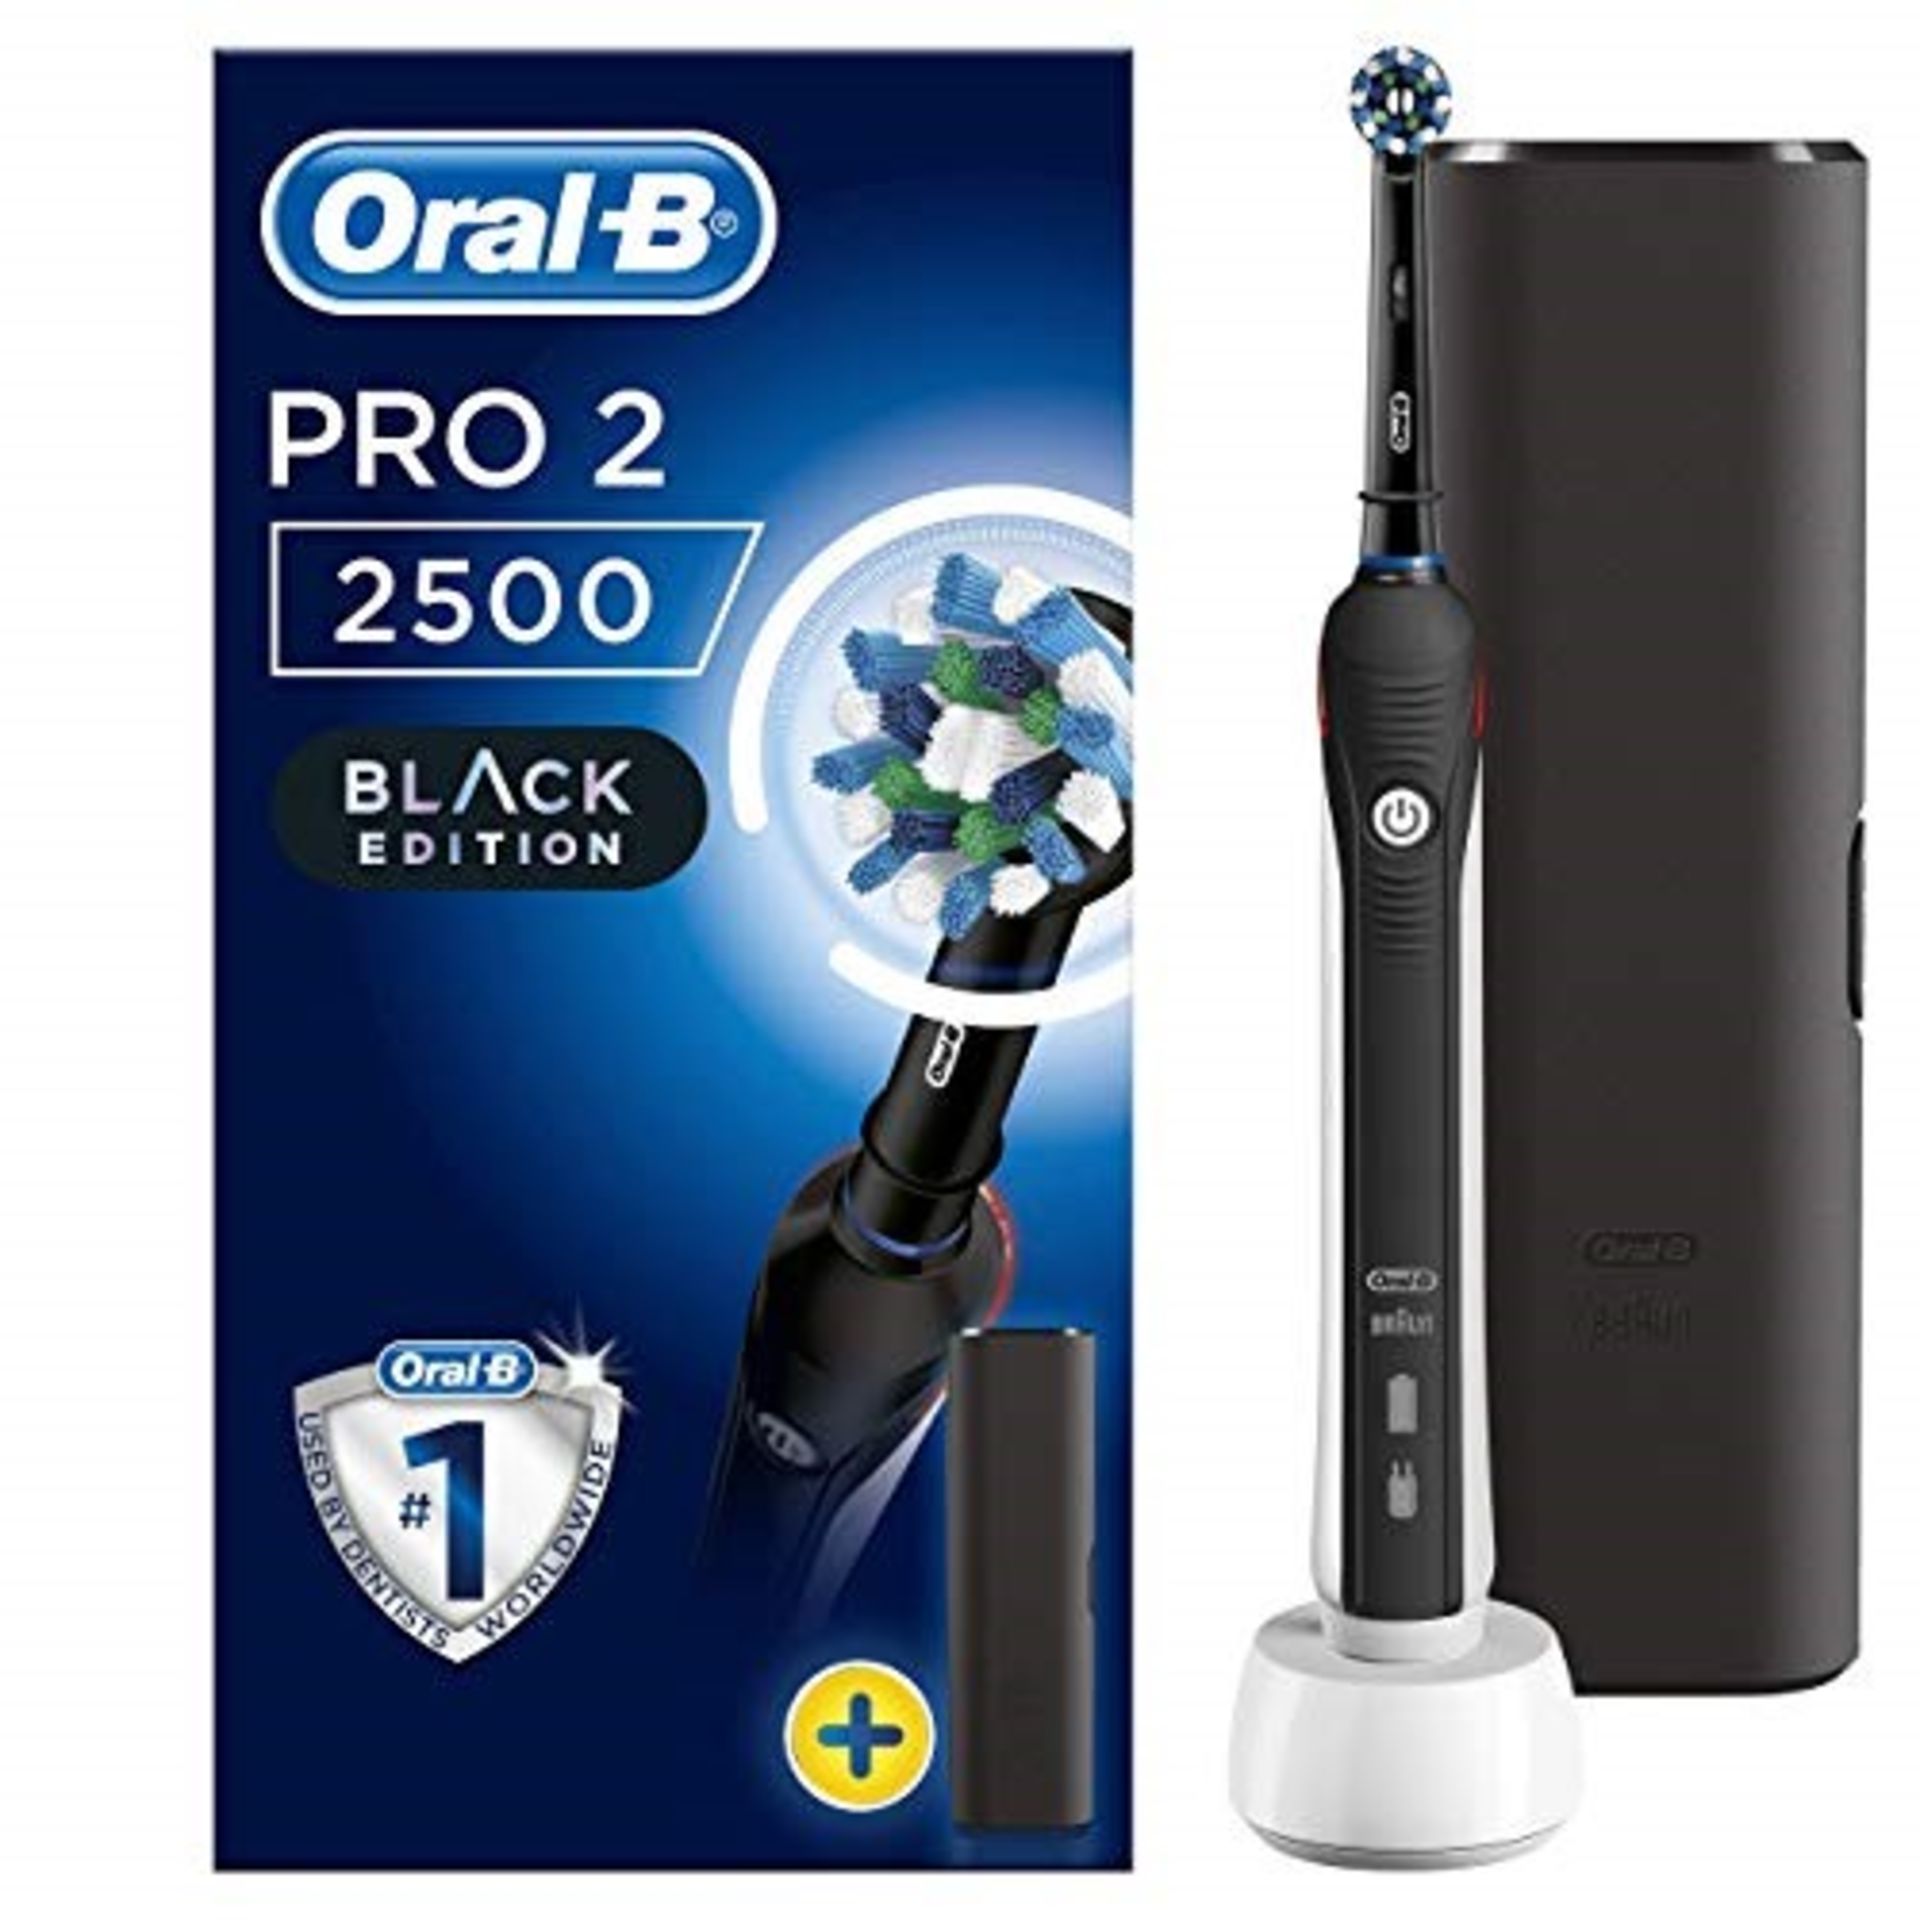 Oral-B Pro 2 2500 CrossAction Electric Toothbrus